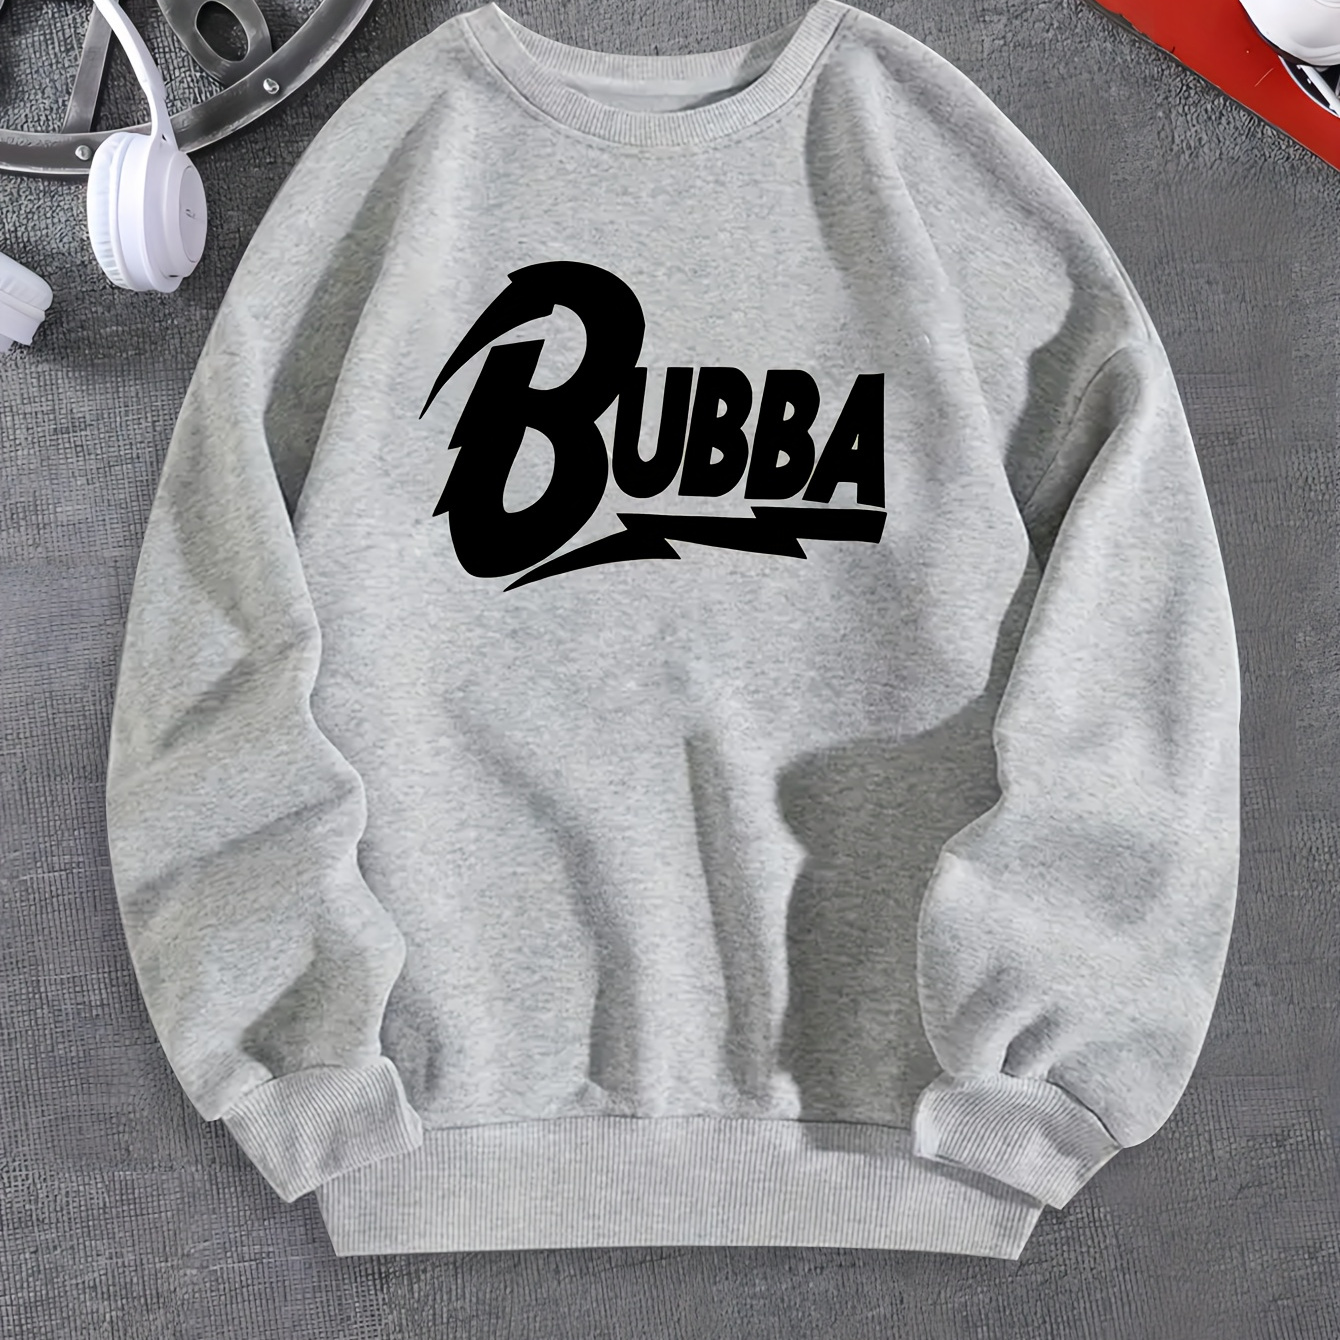 

Bubba Print, Men's Crew Neck Sporty Sweatshirt, Streetwear Pullover With Long Sleeves, Slightly Flex Top Clothing For Men For All Seasons